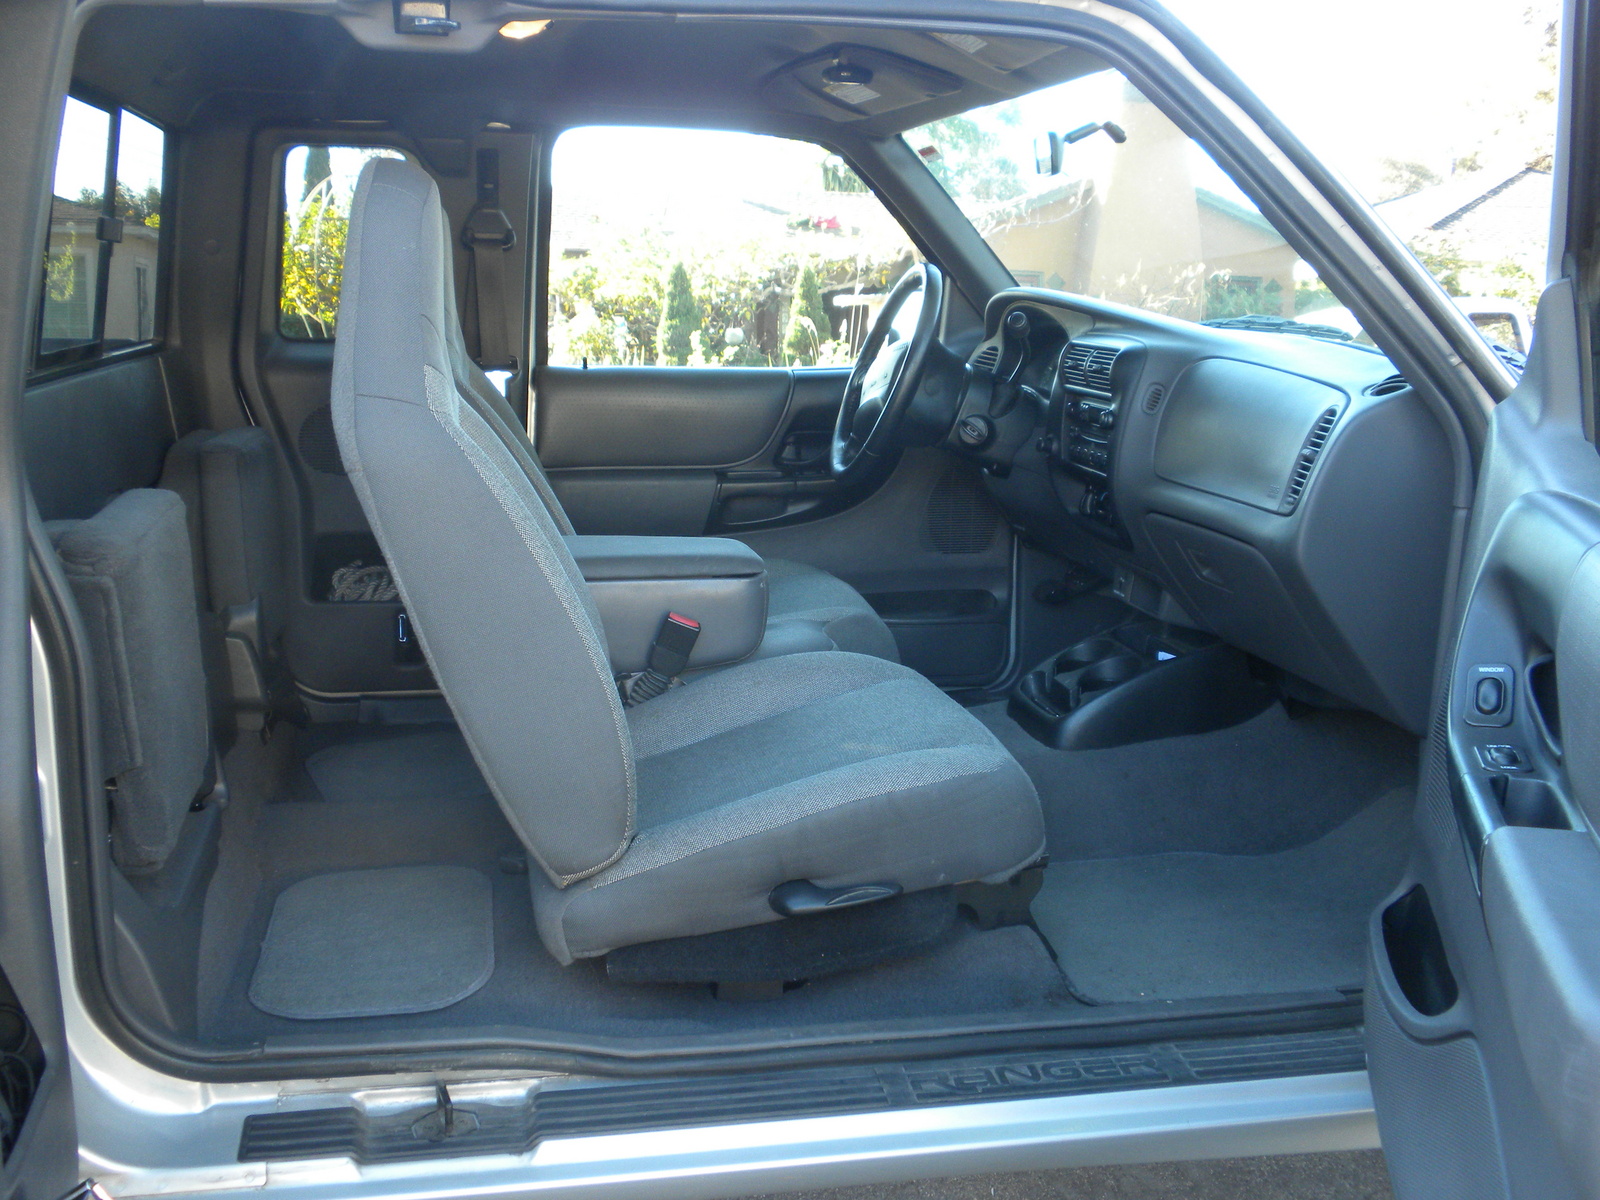 Car seat in ford ranger extended cab #6